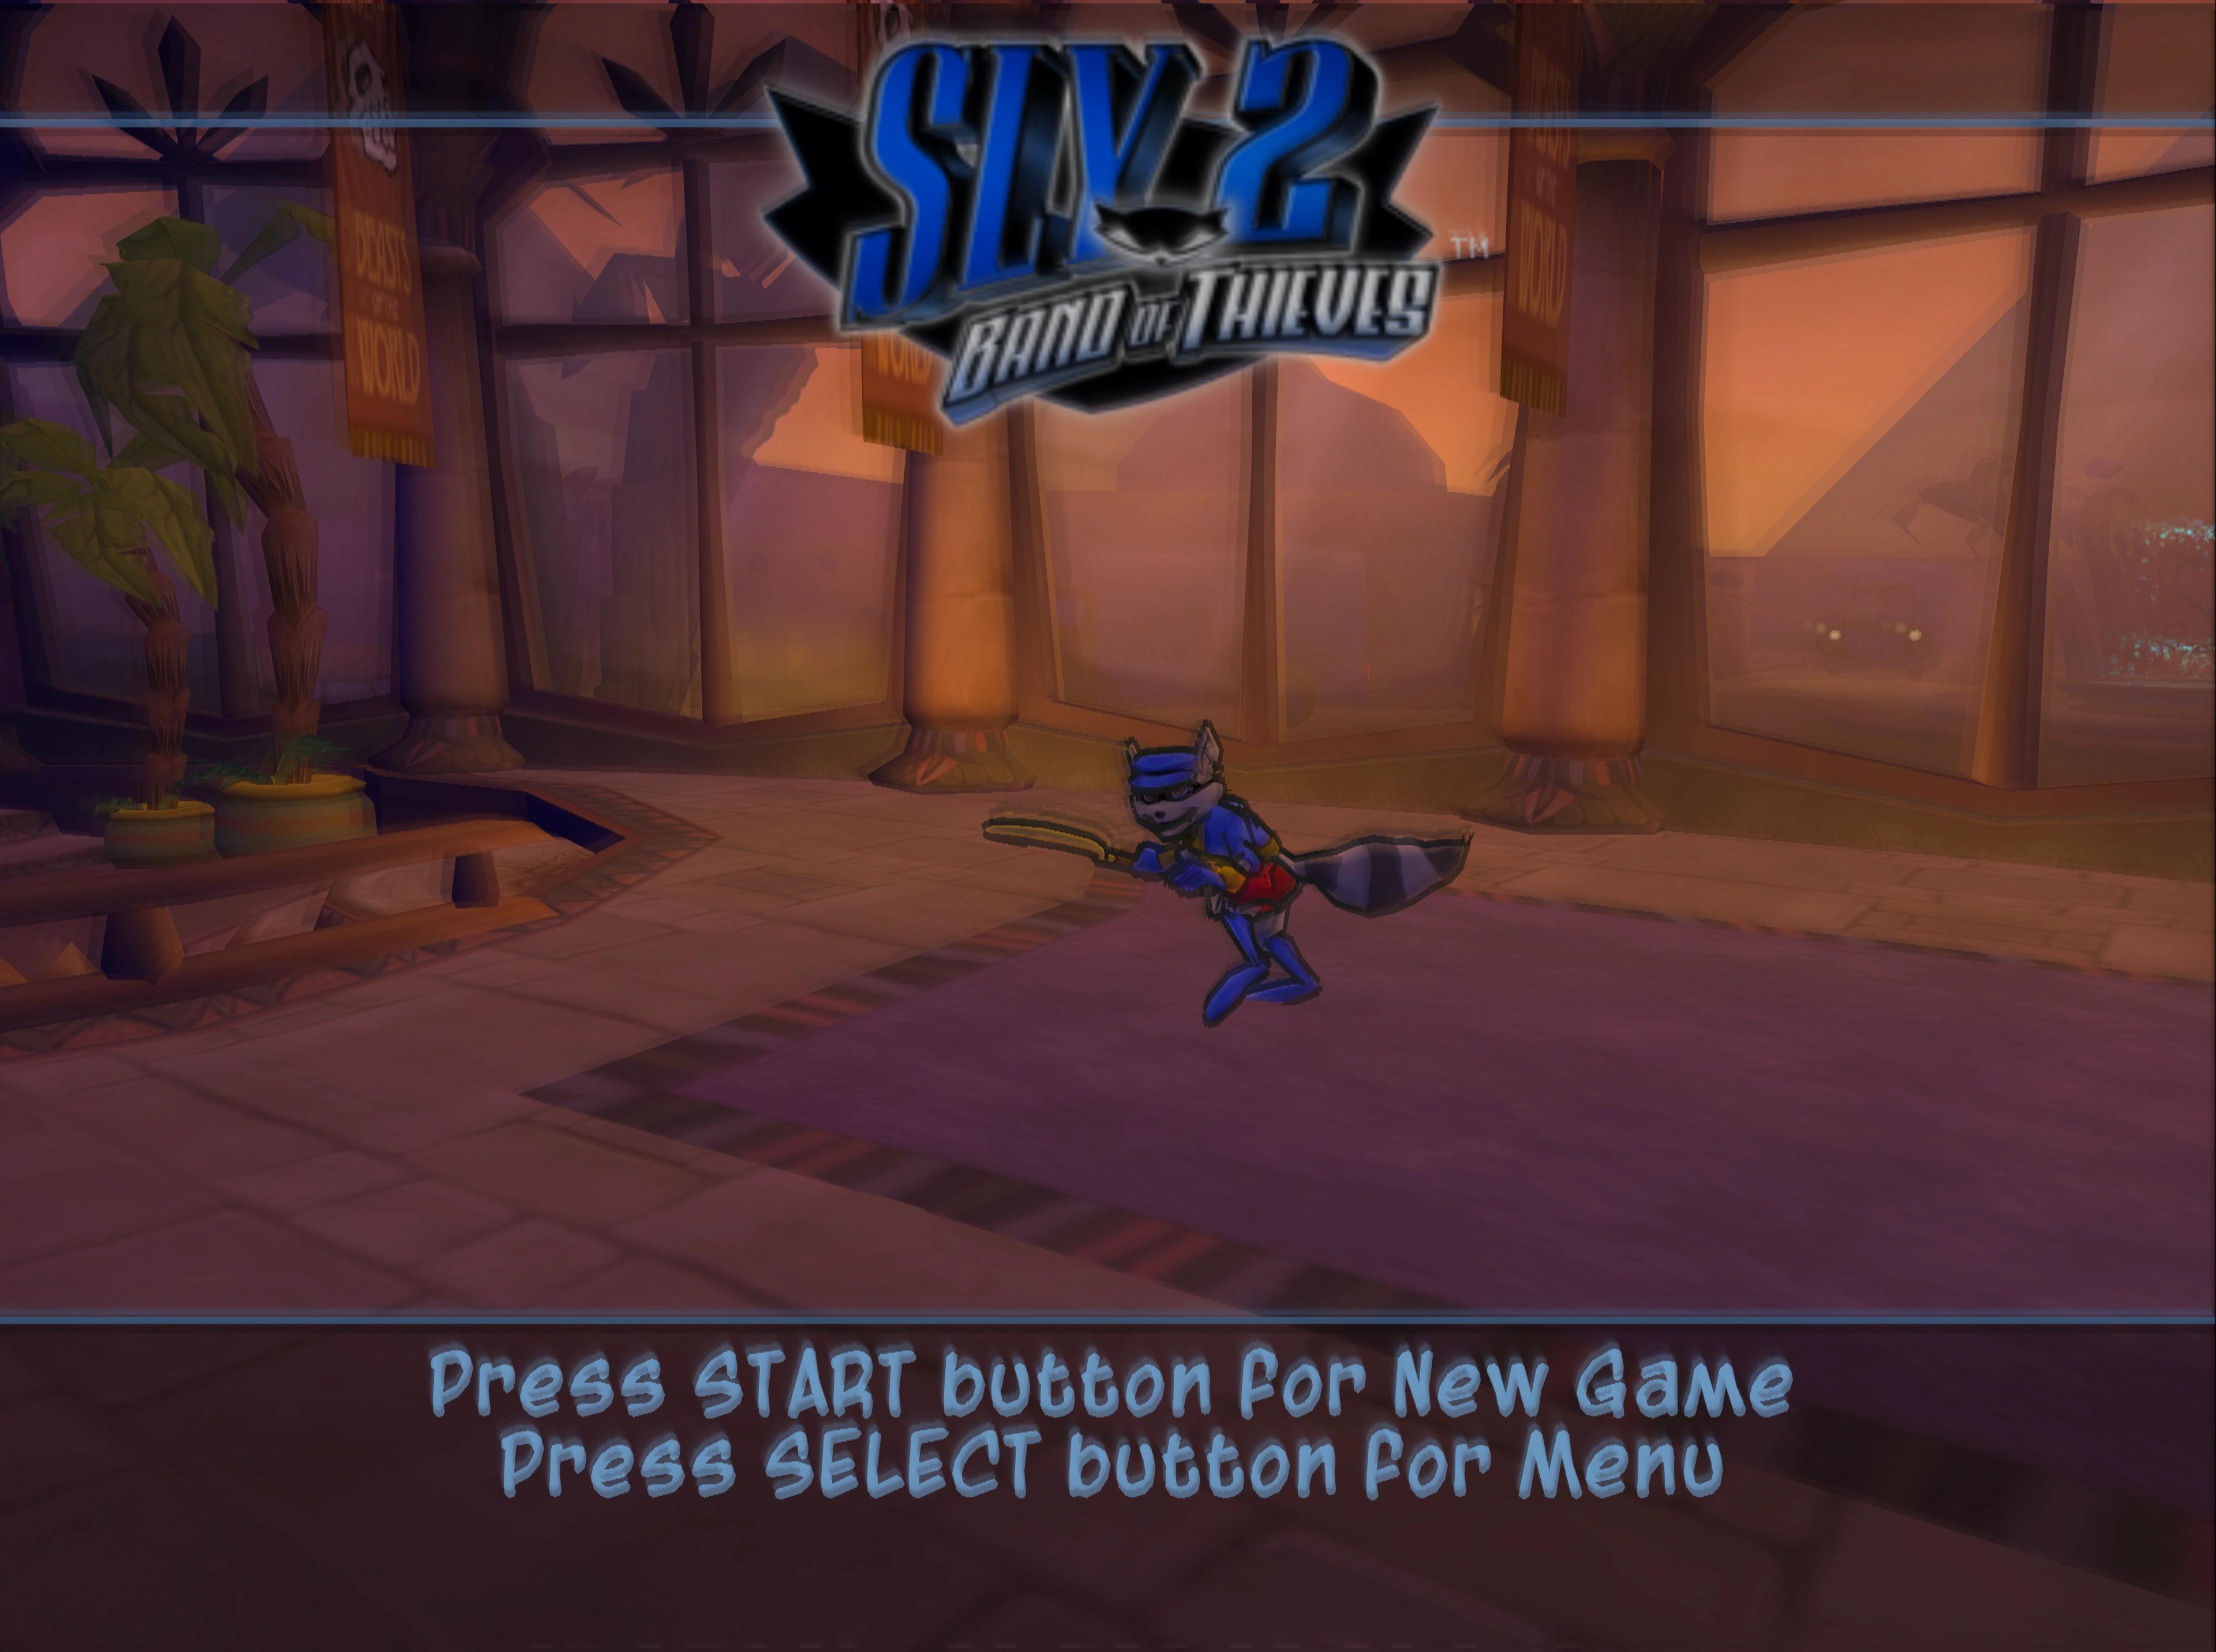 Sly 2: Band of Thieves - PlayStation 2 (PS2) Game